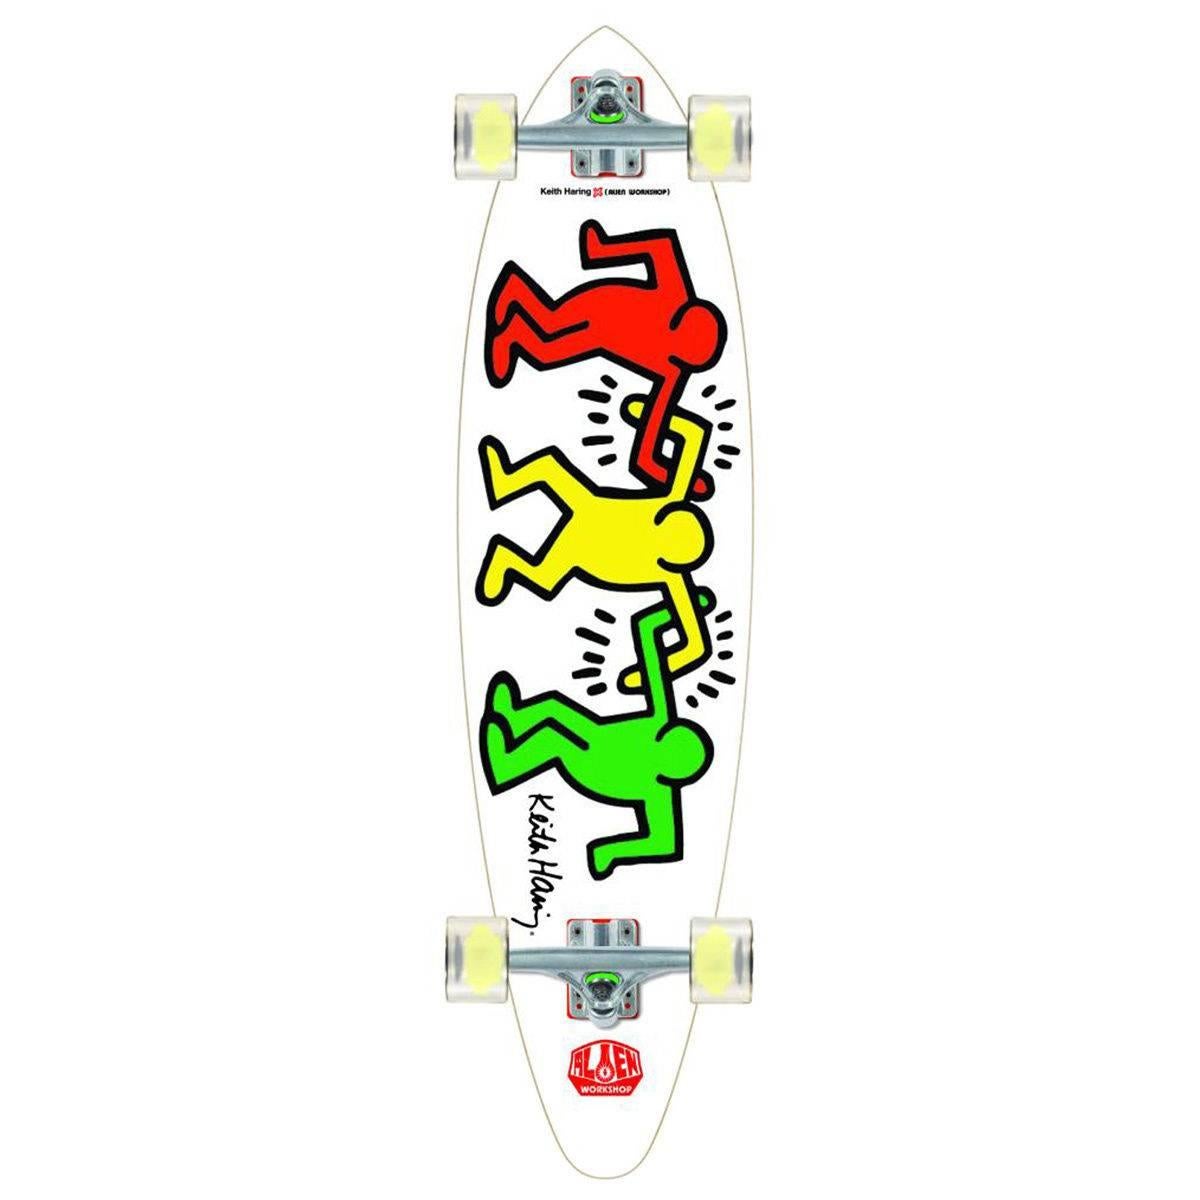 Rare Out of Print Keith Haring Long board Cruiser 
Produced in 2012 as a result of a collaboration between Alien Workshop & The Keith Haring Foundation. A superb collector's item; this piece is out of print and will not be reproduced again.